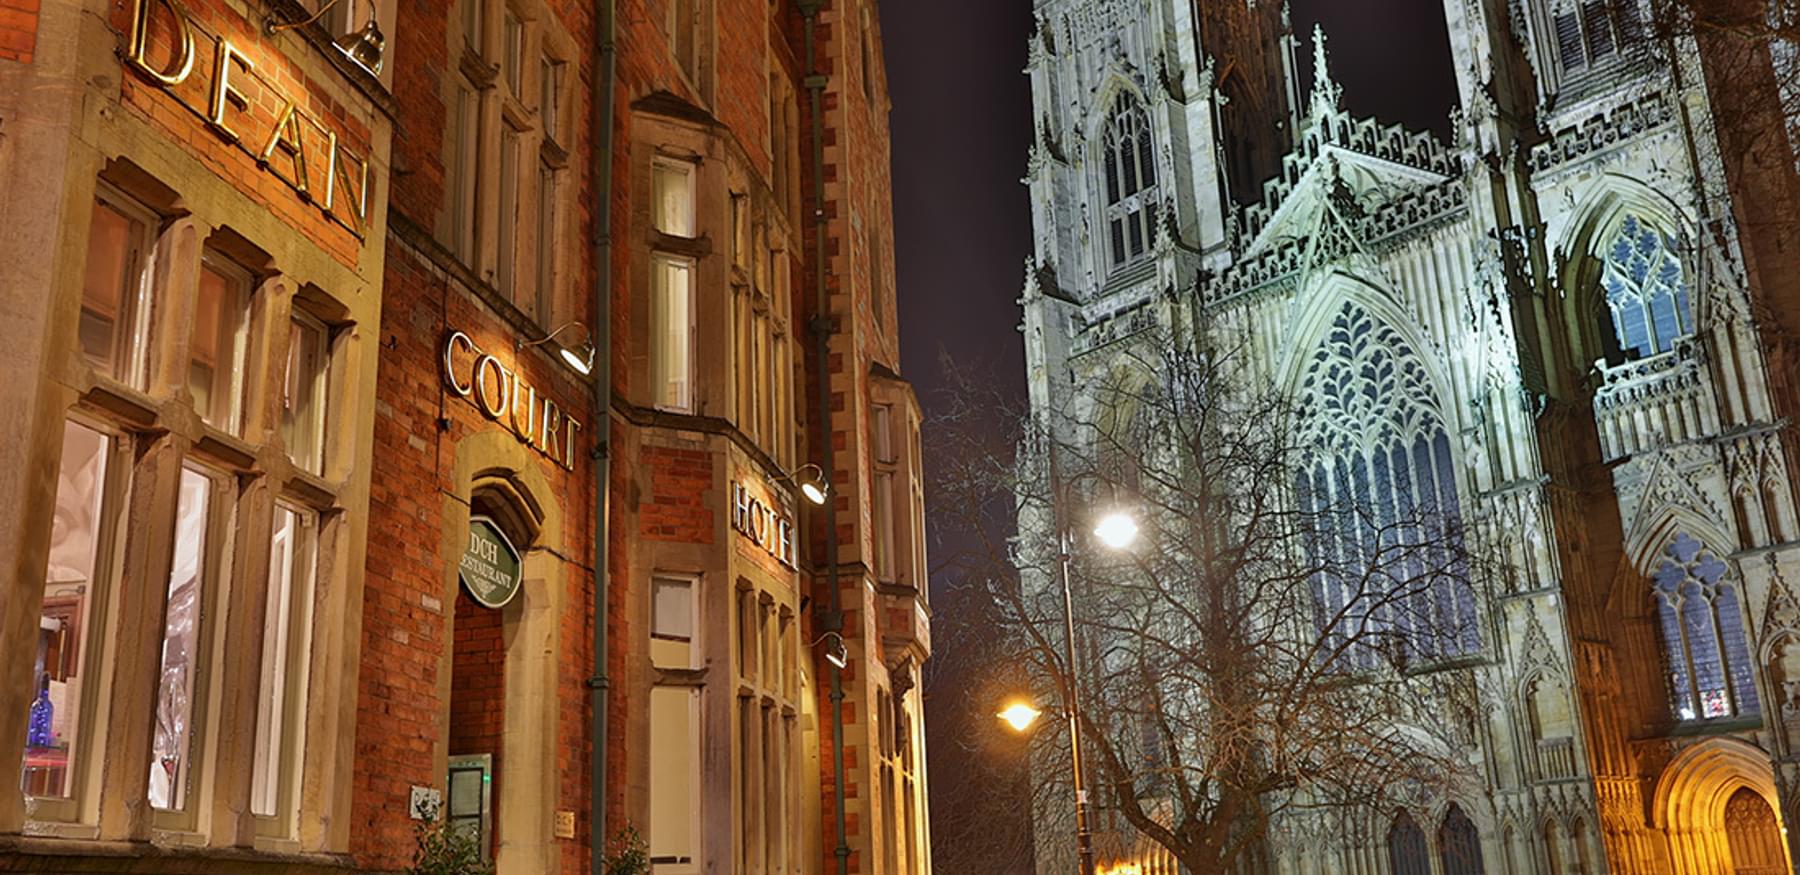 Dean Court hotel and York Minster night 003